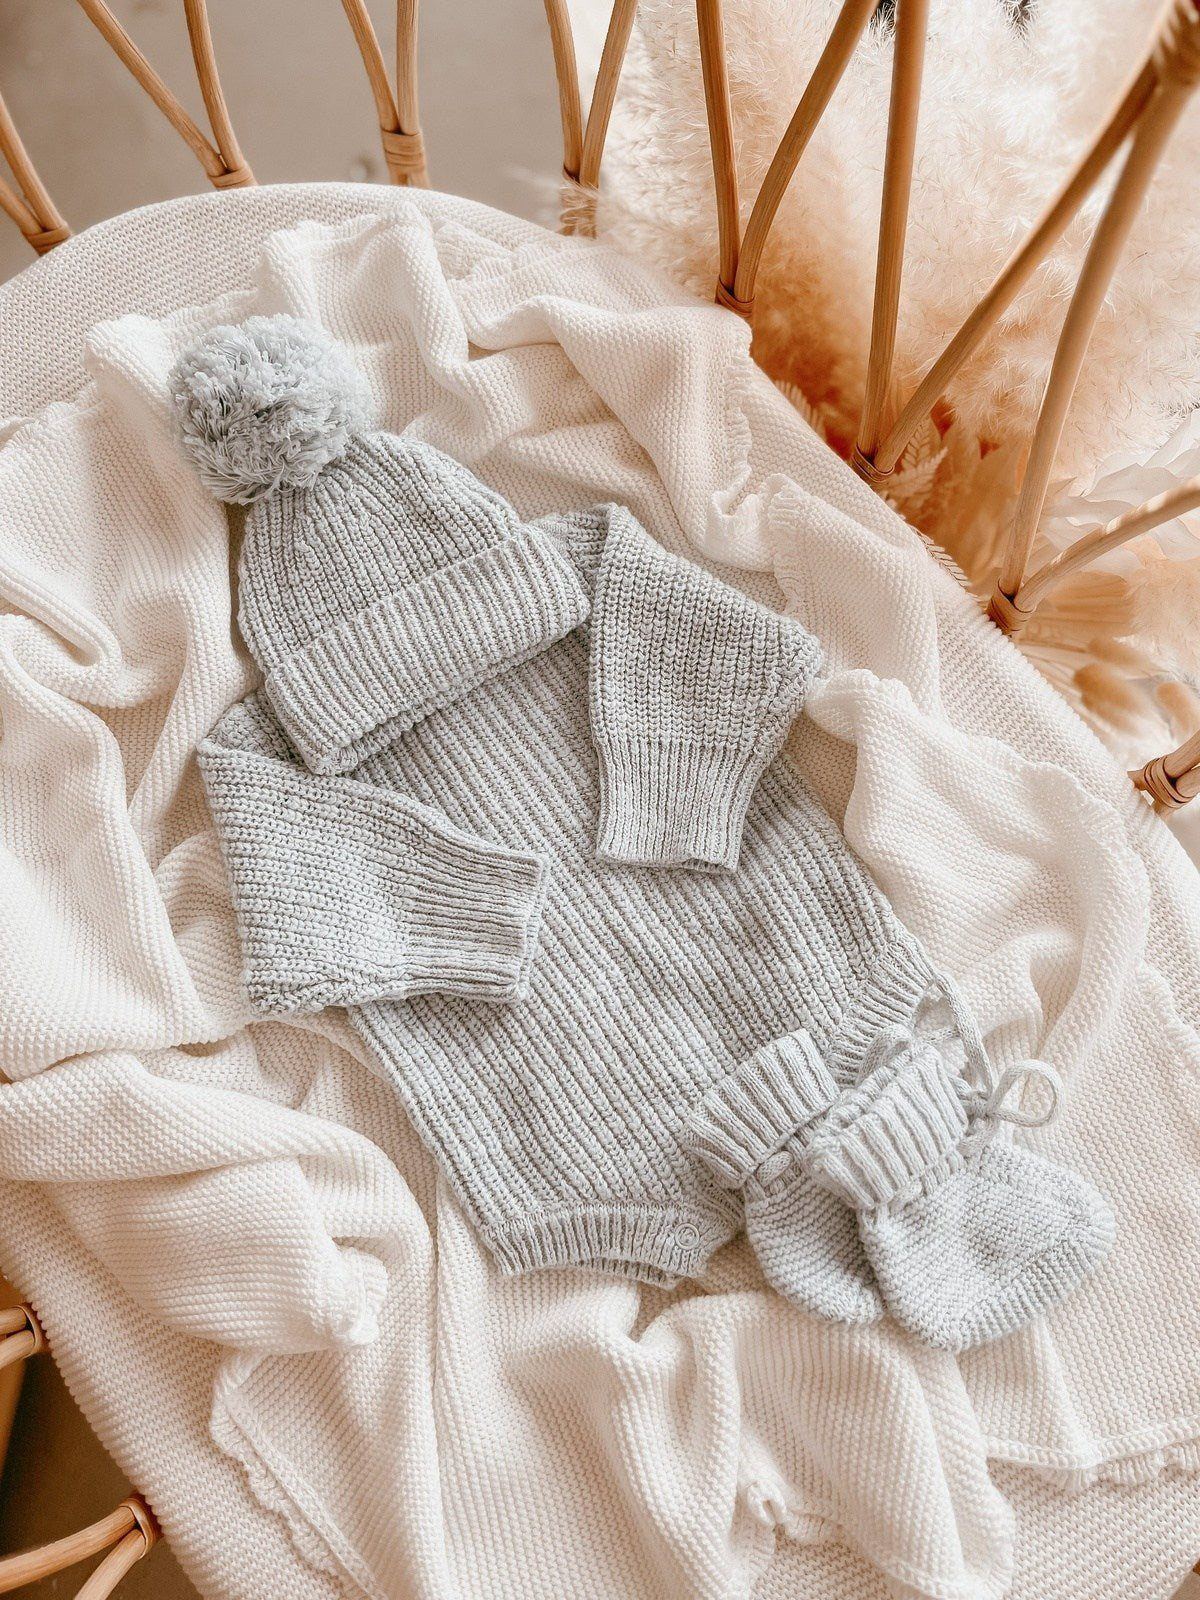 Chunky Knit Booties | Periwinkle